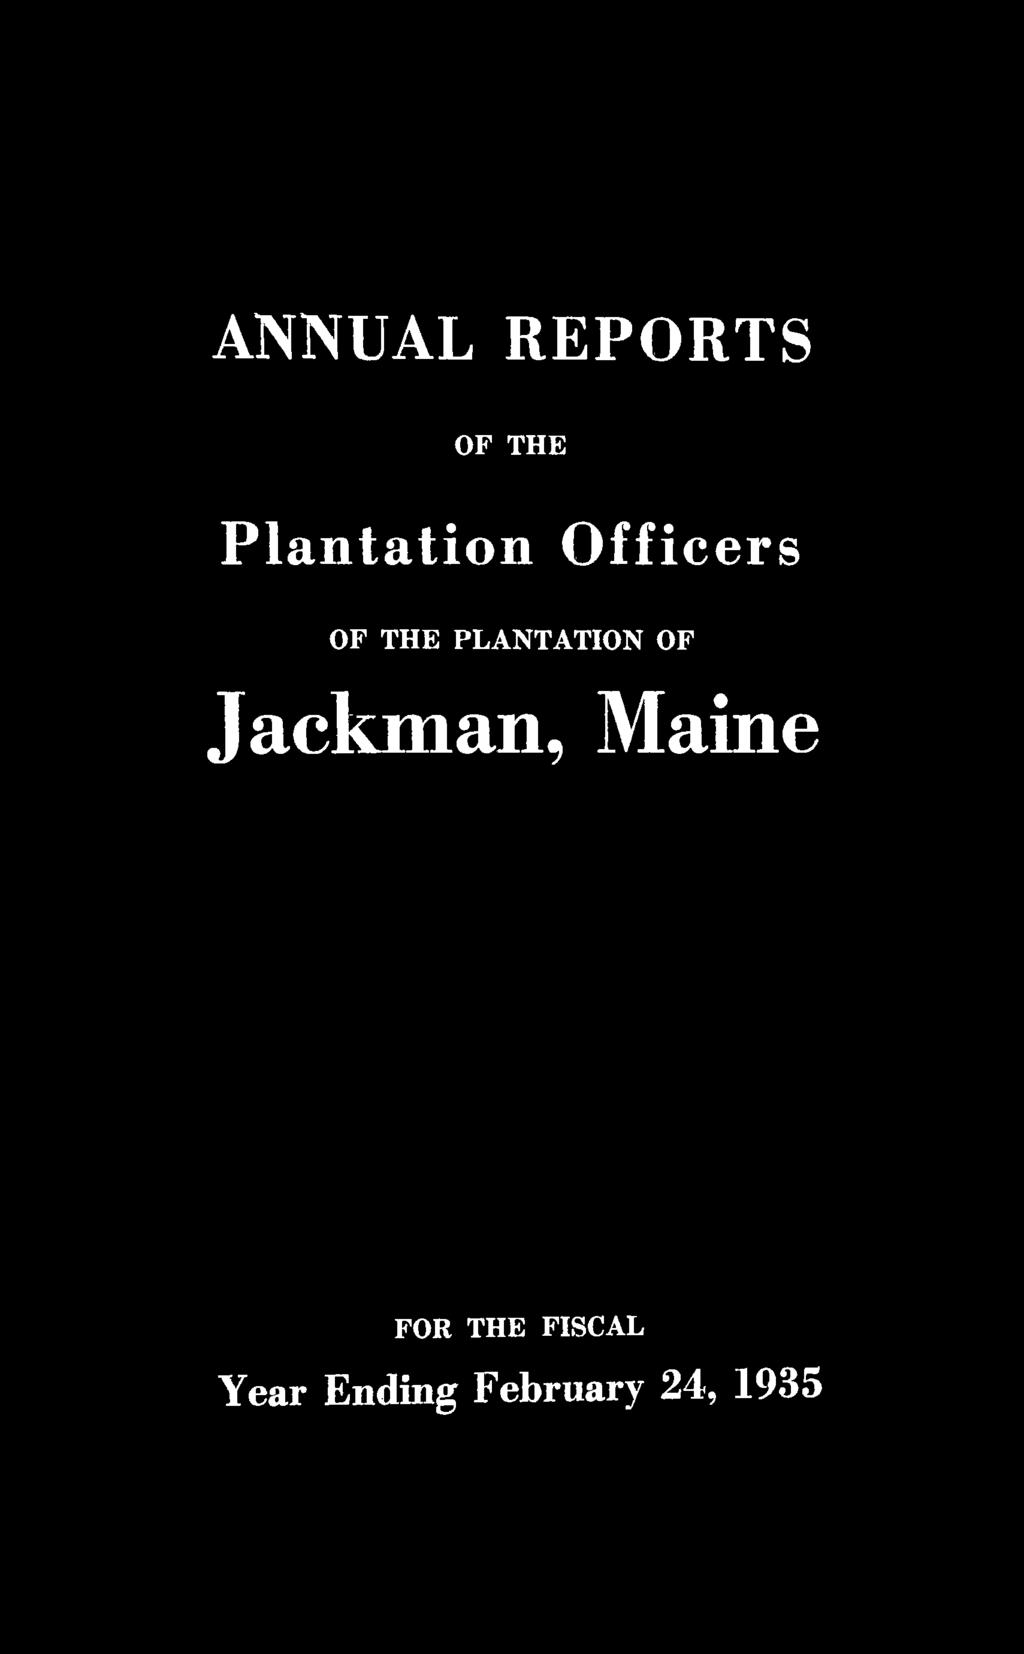 ANNUAL REPORTS OF THE Plantation Officers OF THE PLANTATION